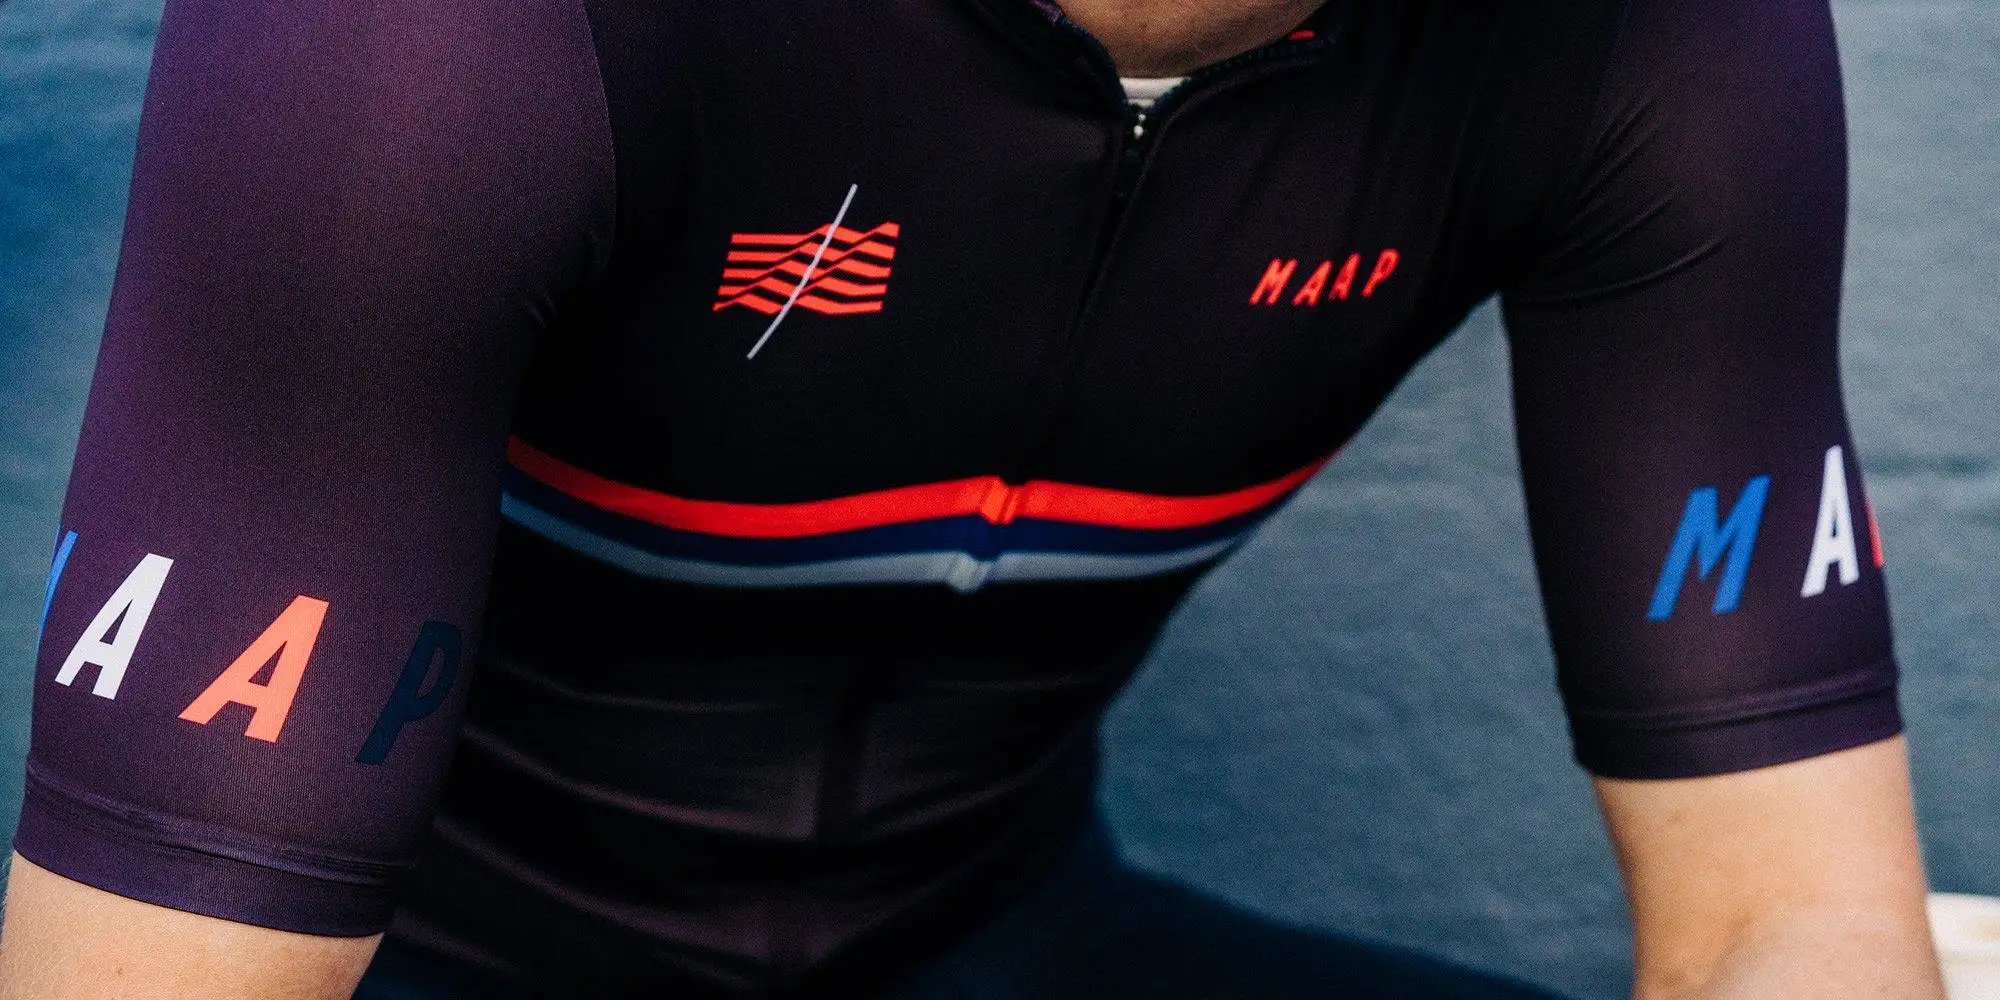 maap nationals pro jersey